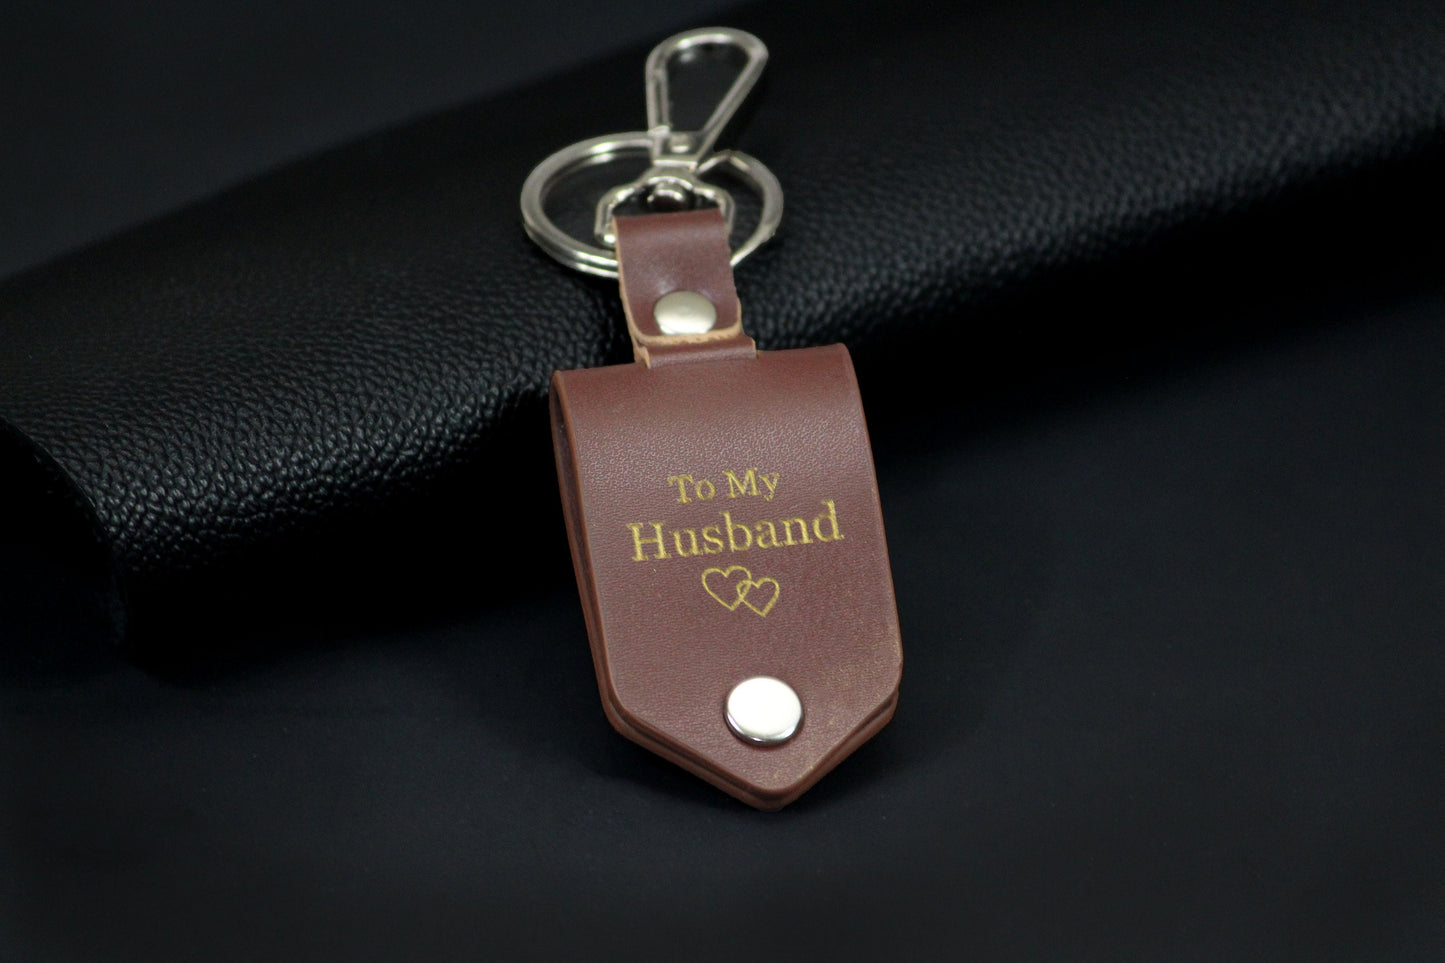 Father's Day, Custom Leather Keychain, Customizable keychain, Personalized Photo, Drive Safe Keychain, First Time Dad Mom Gift